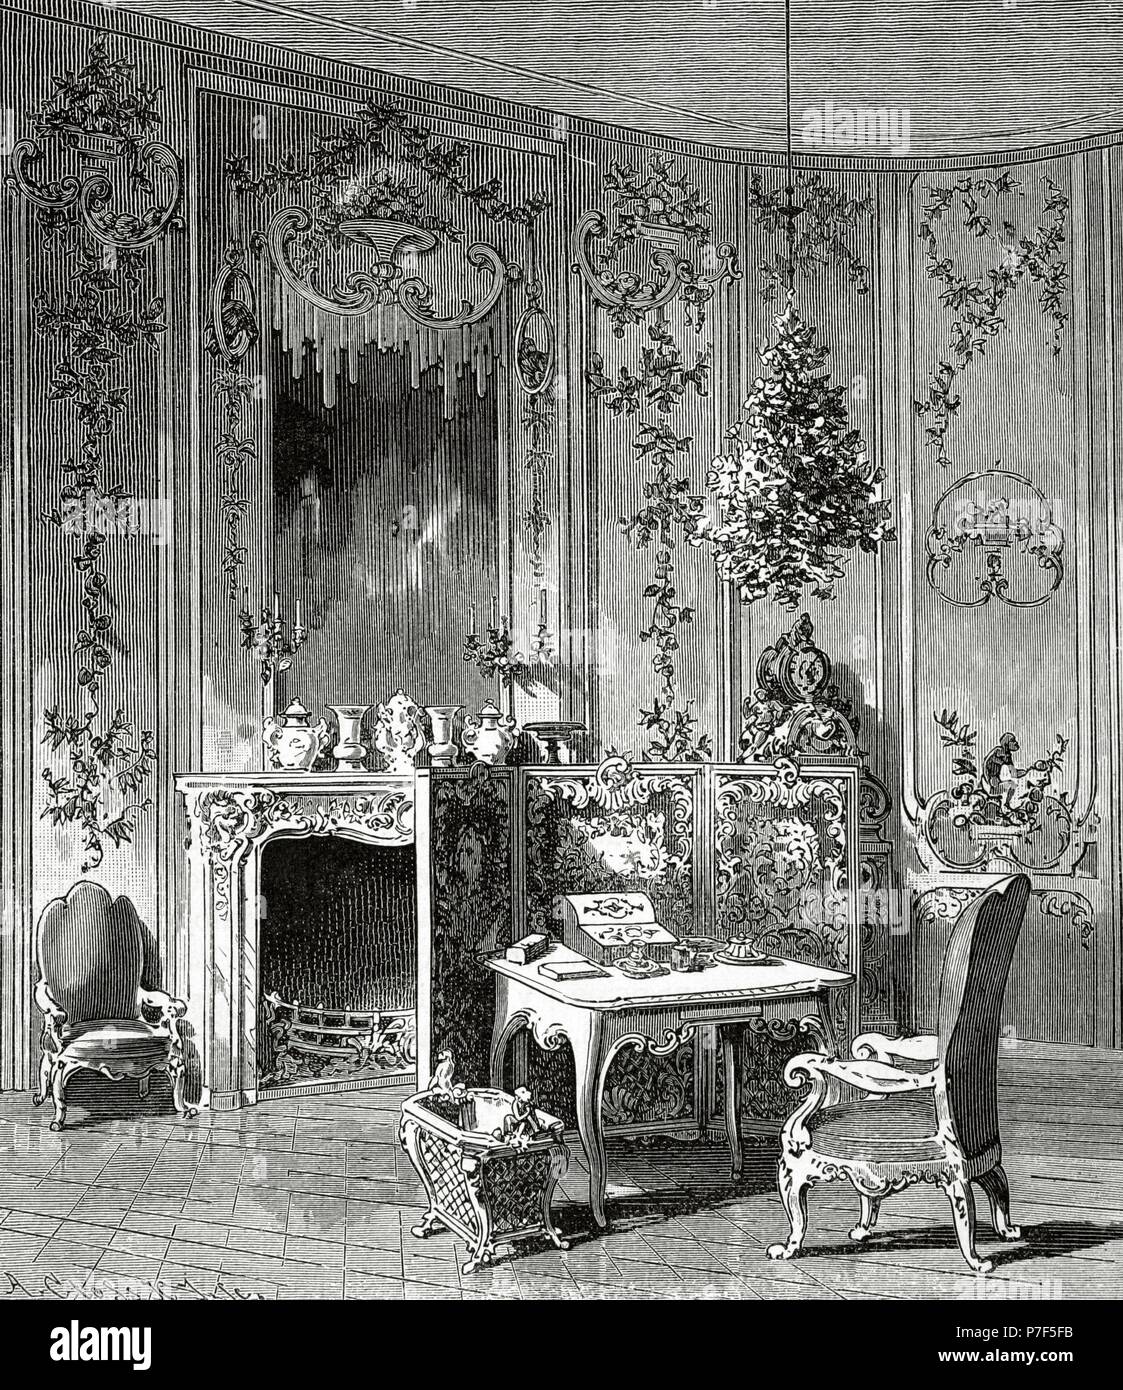 Voltaire (Francois Marie Arouet) (1694-1778). French philosopher and writer. Voltaire's room in the Sanssouci Palace in Potsdam. Engraving by A. Closs. Universal History, 1885. Stock Photo